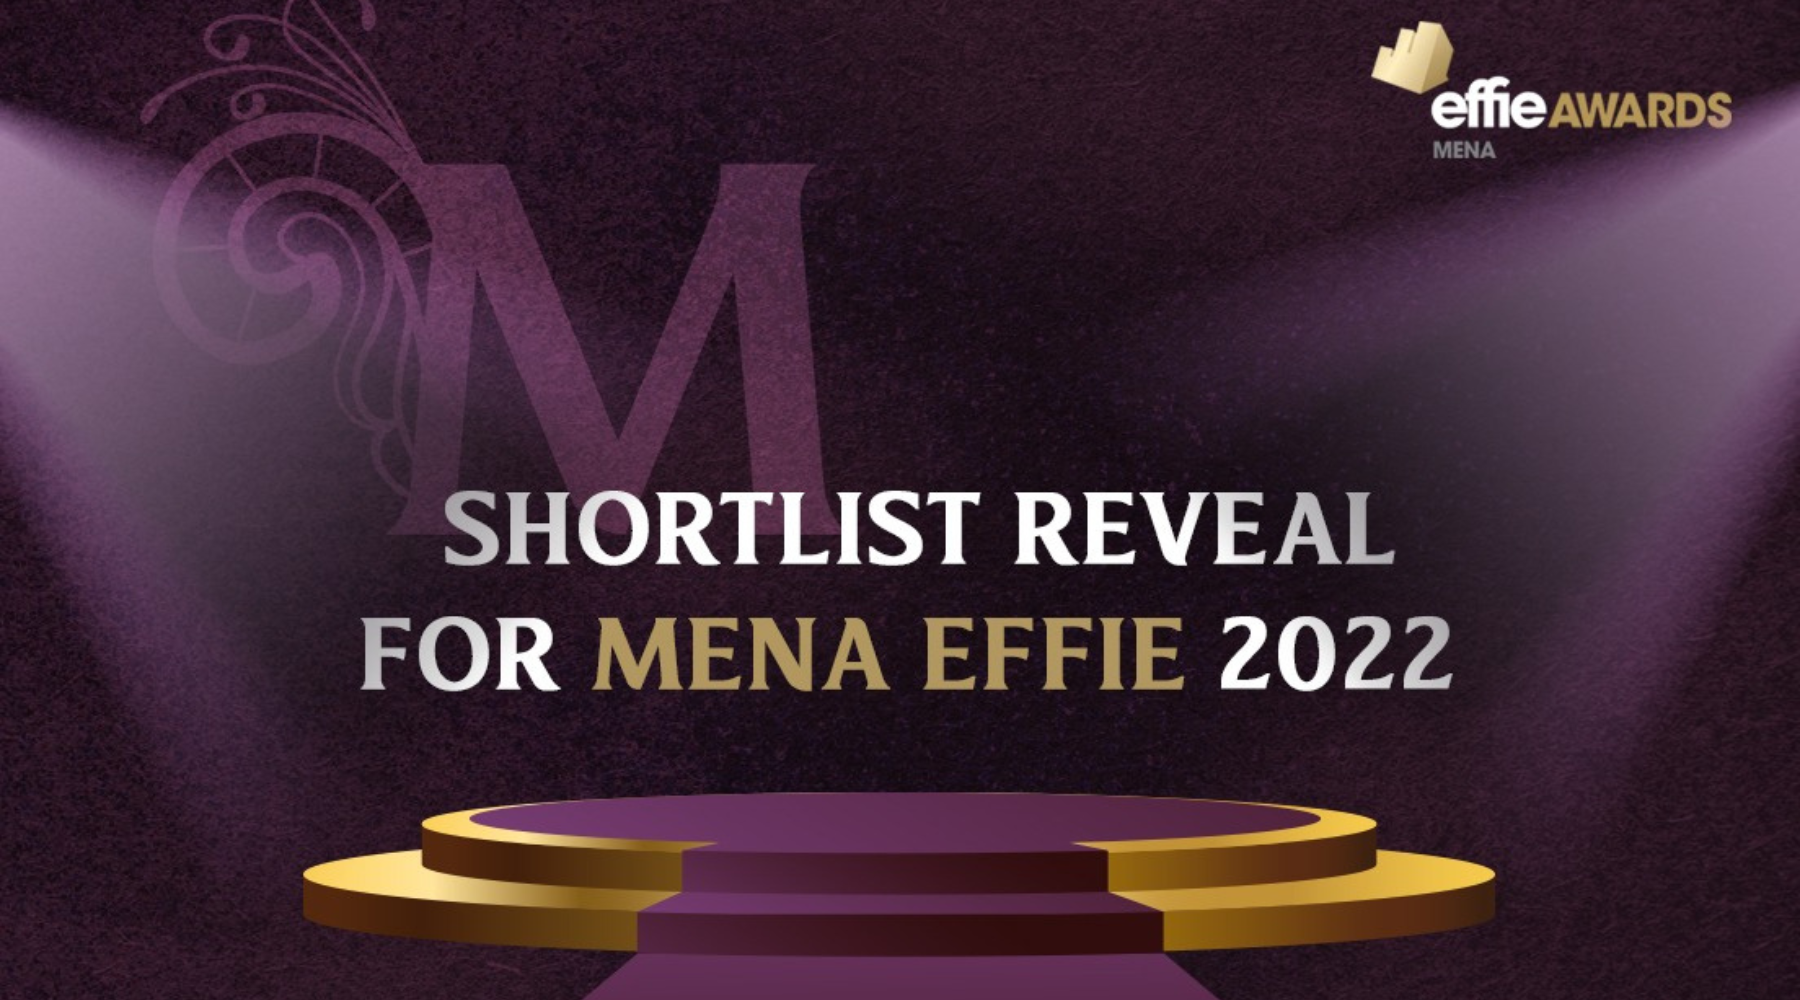 MENA Effie Awards Shortlist for 2022 is Out Now!